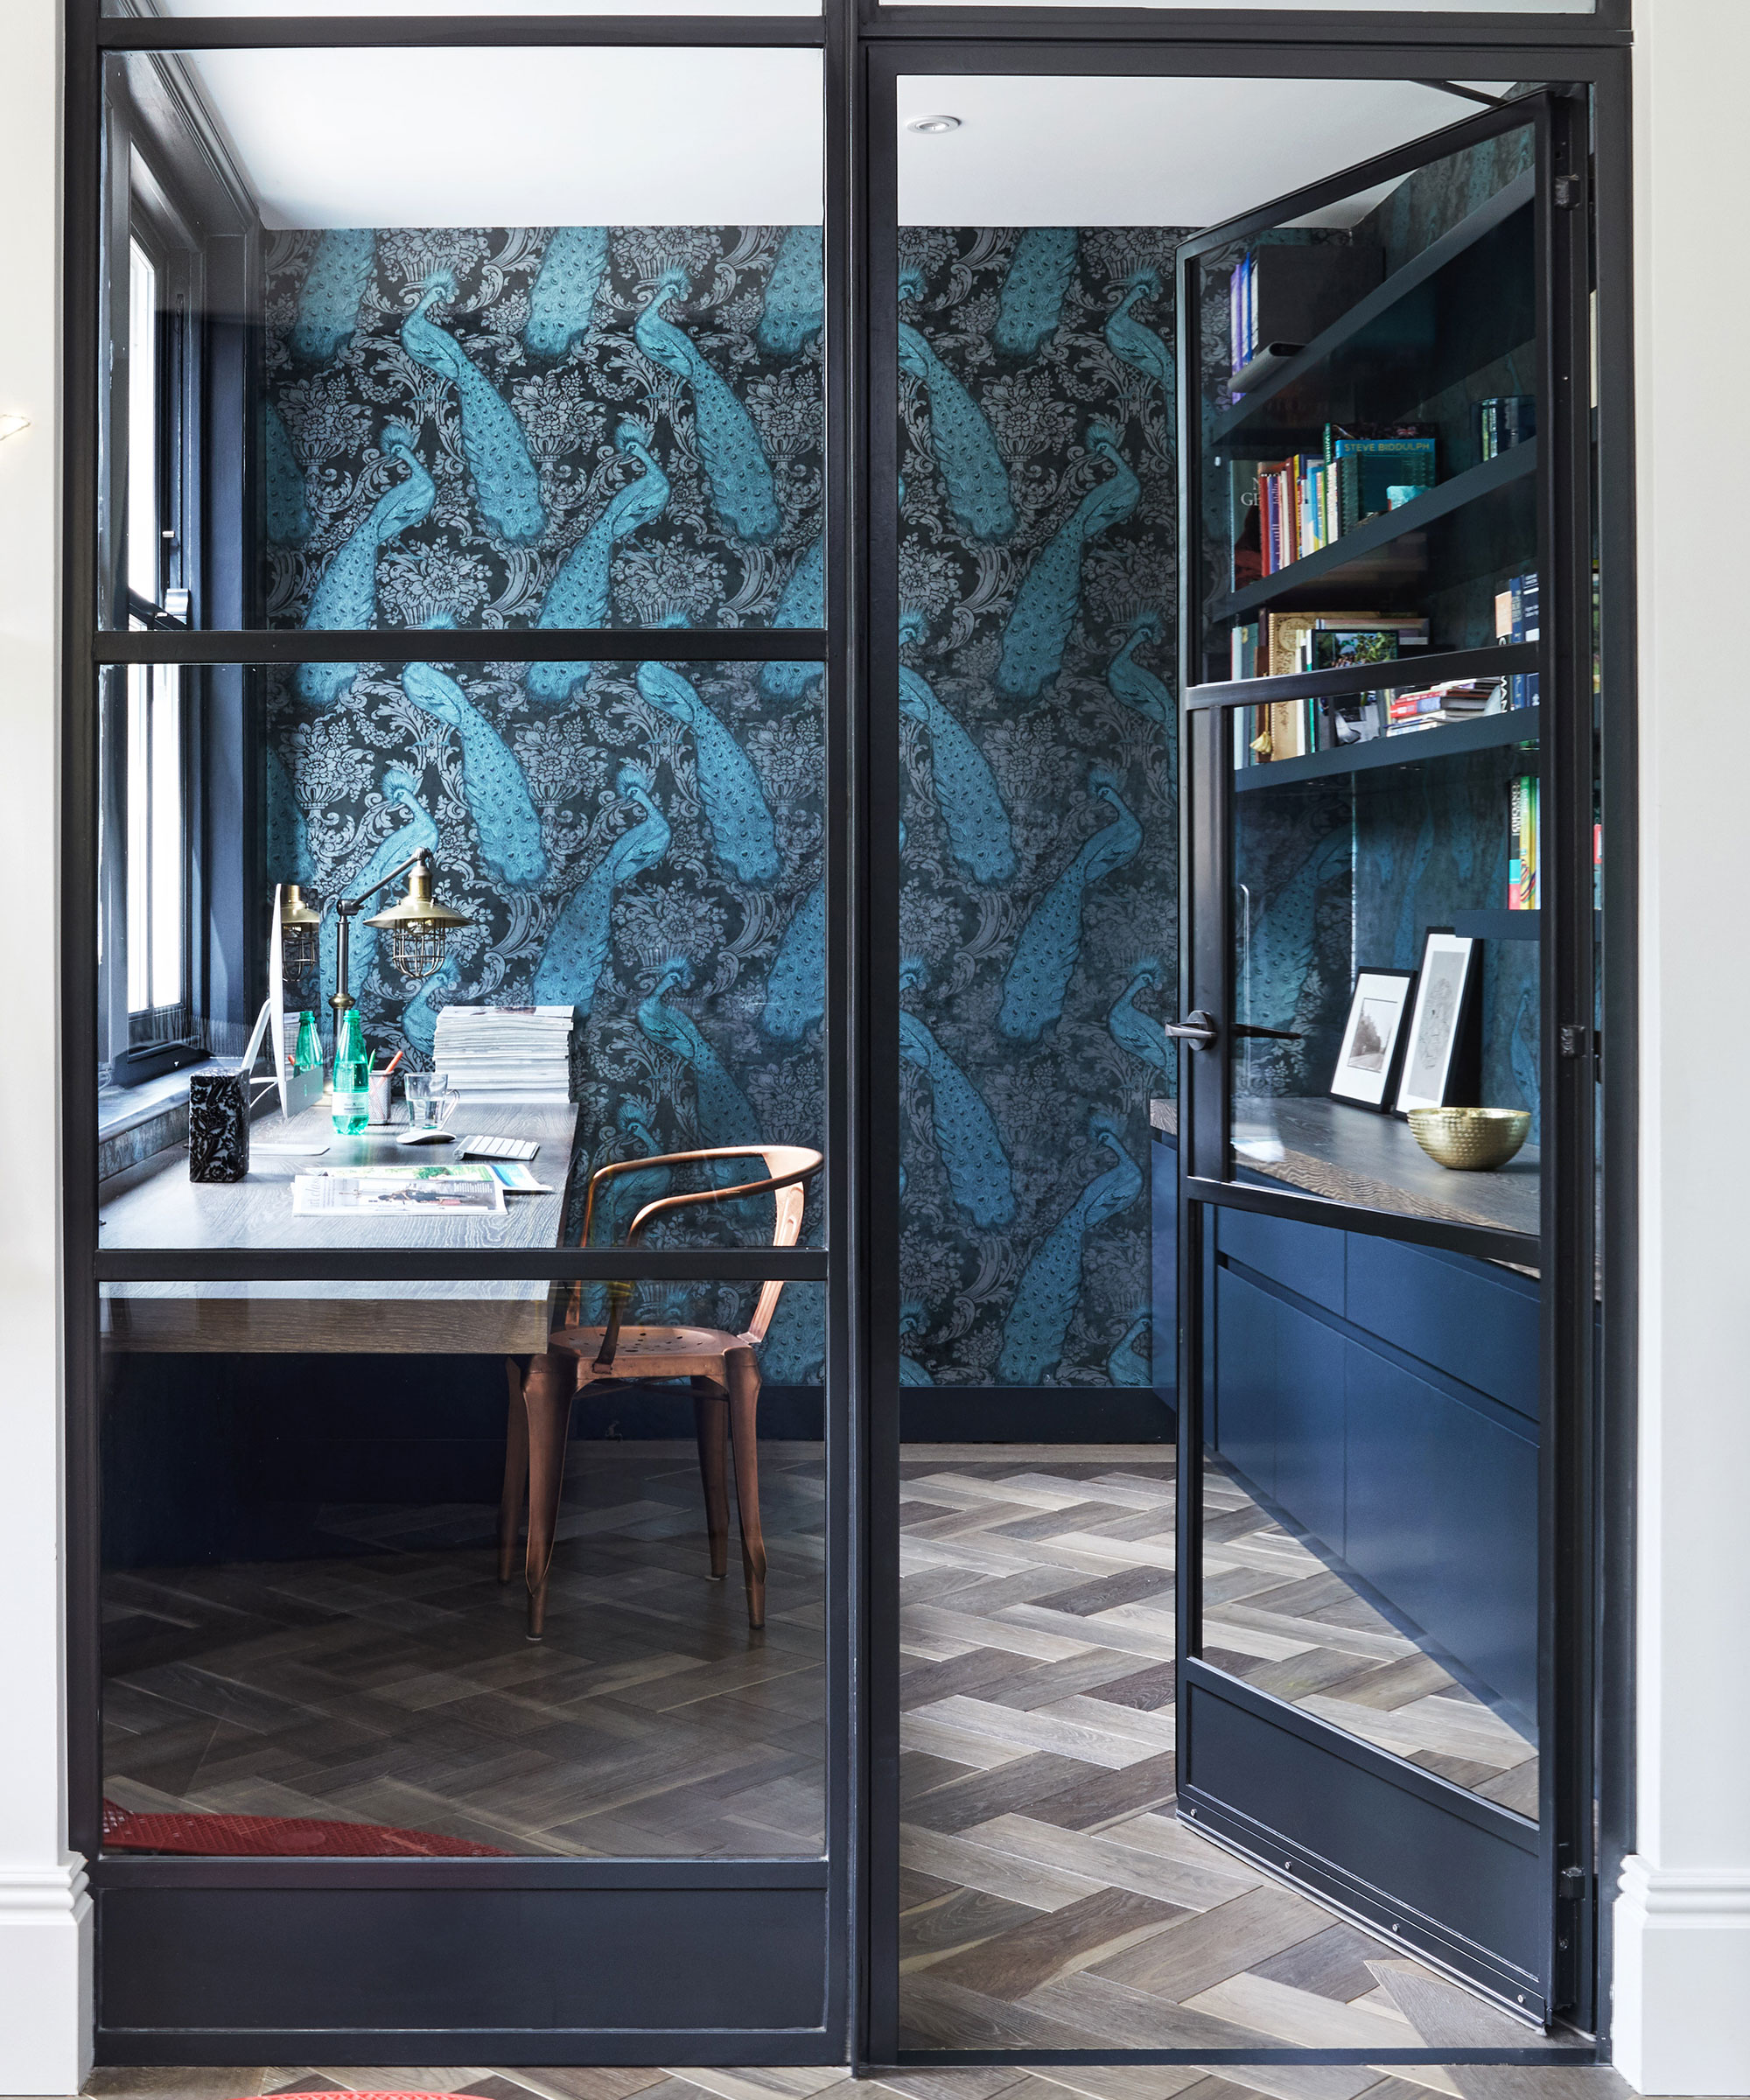 An example of a home office box room idea with dark blue walls, glass door and built-in shelving